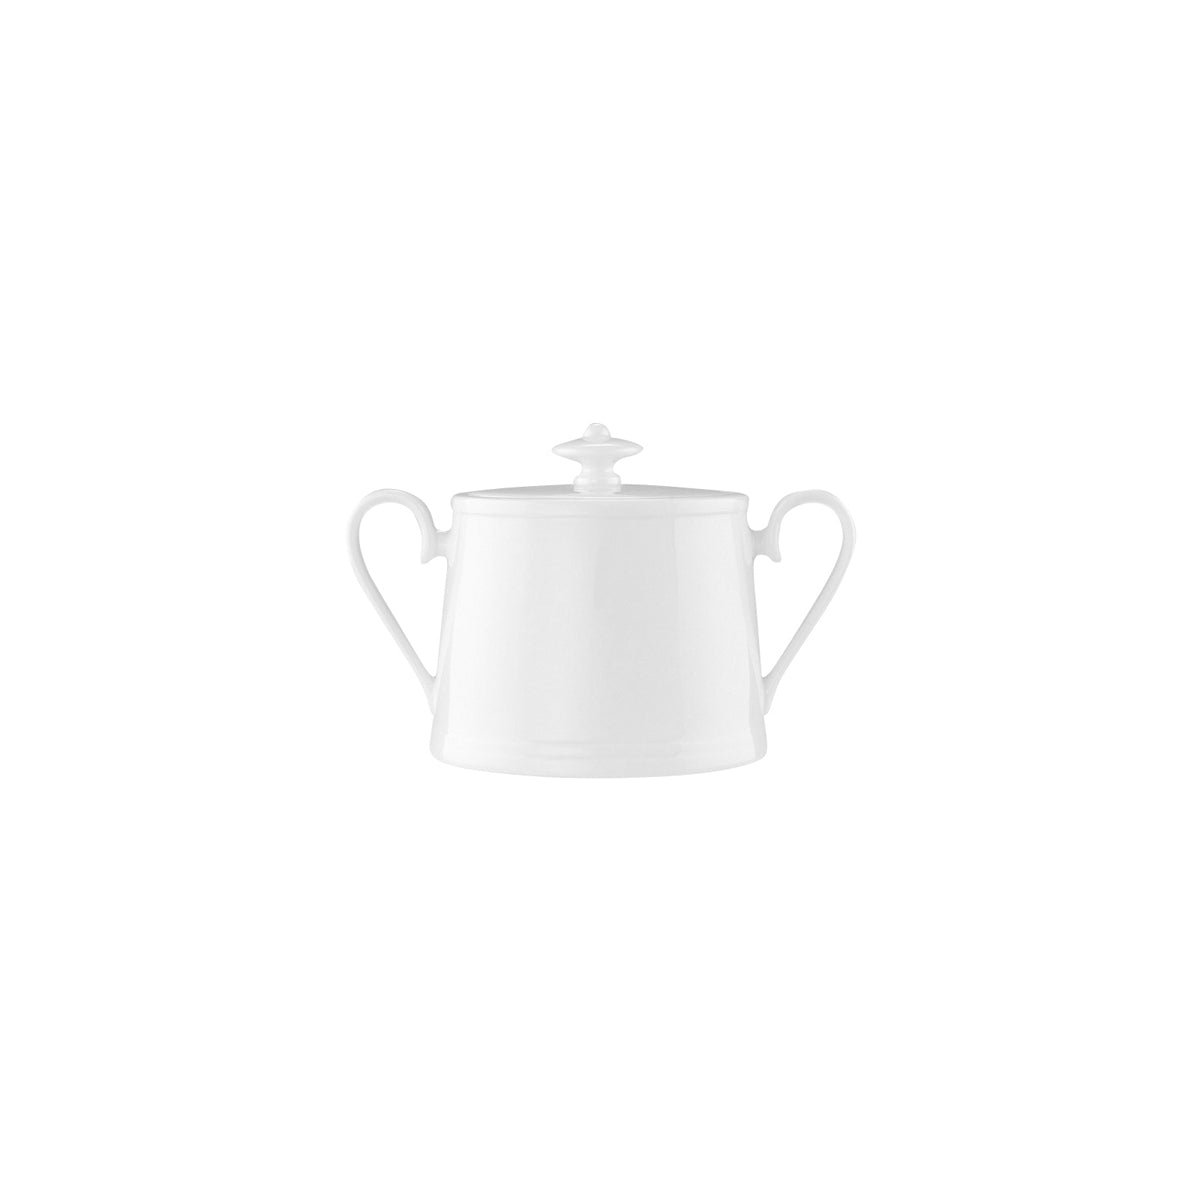 VB16-3272-0960 Villeroy And Boch Villeroy And Boch Stella Hotel White Sugar Bowl with Lid 350ml Tomkin Australia Hospitality Supplies